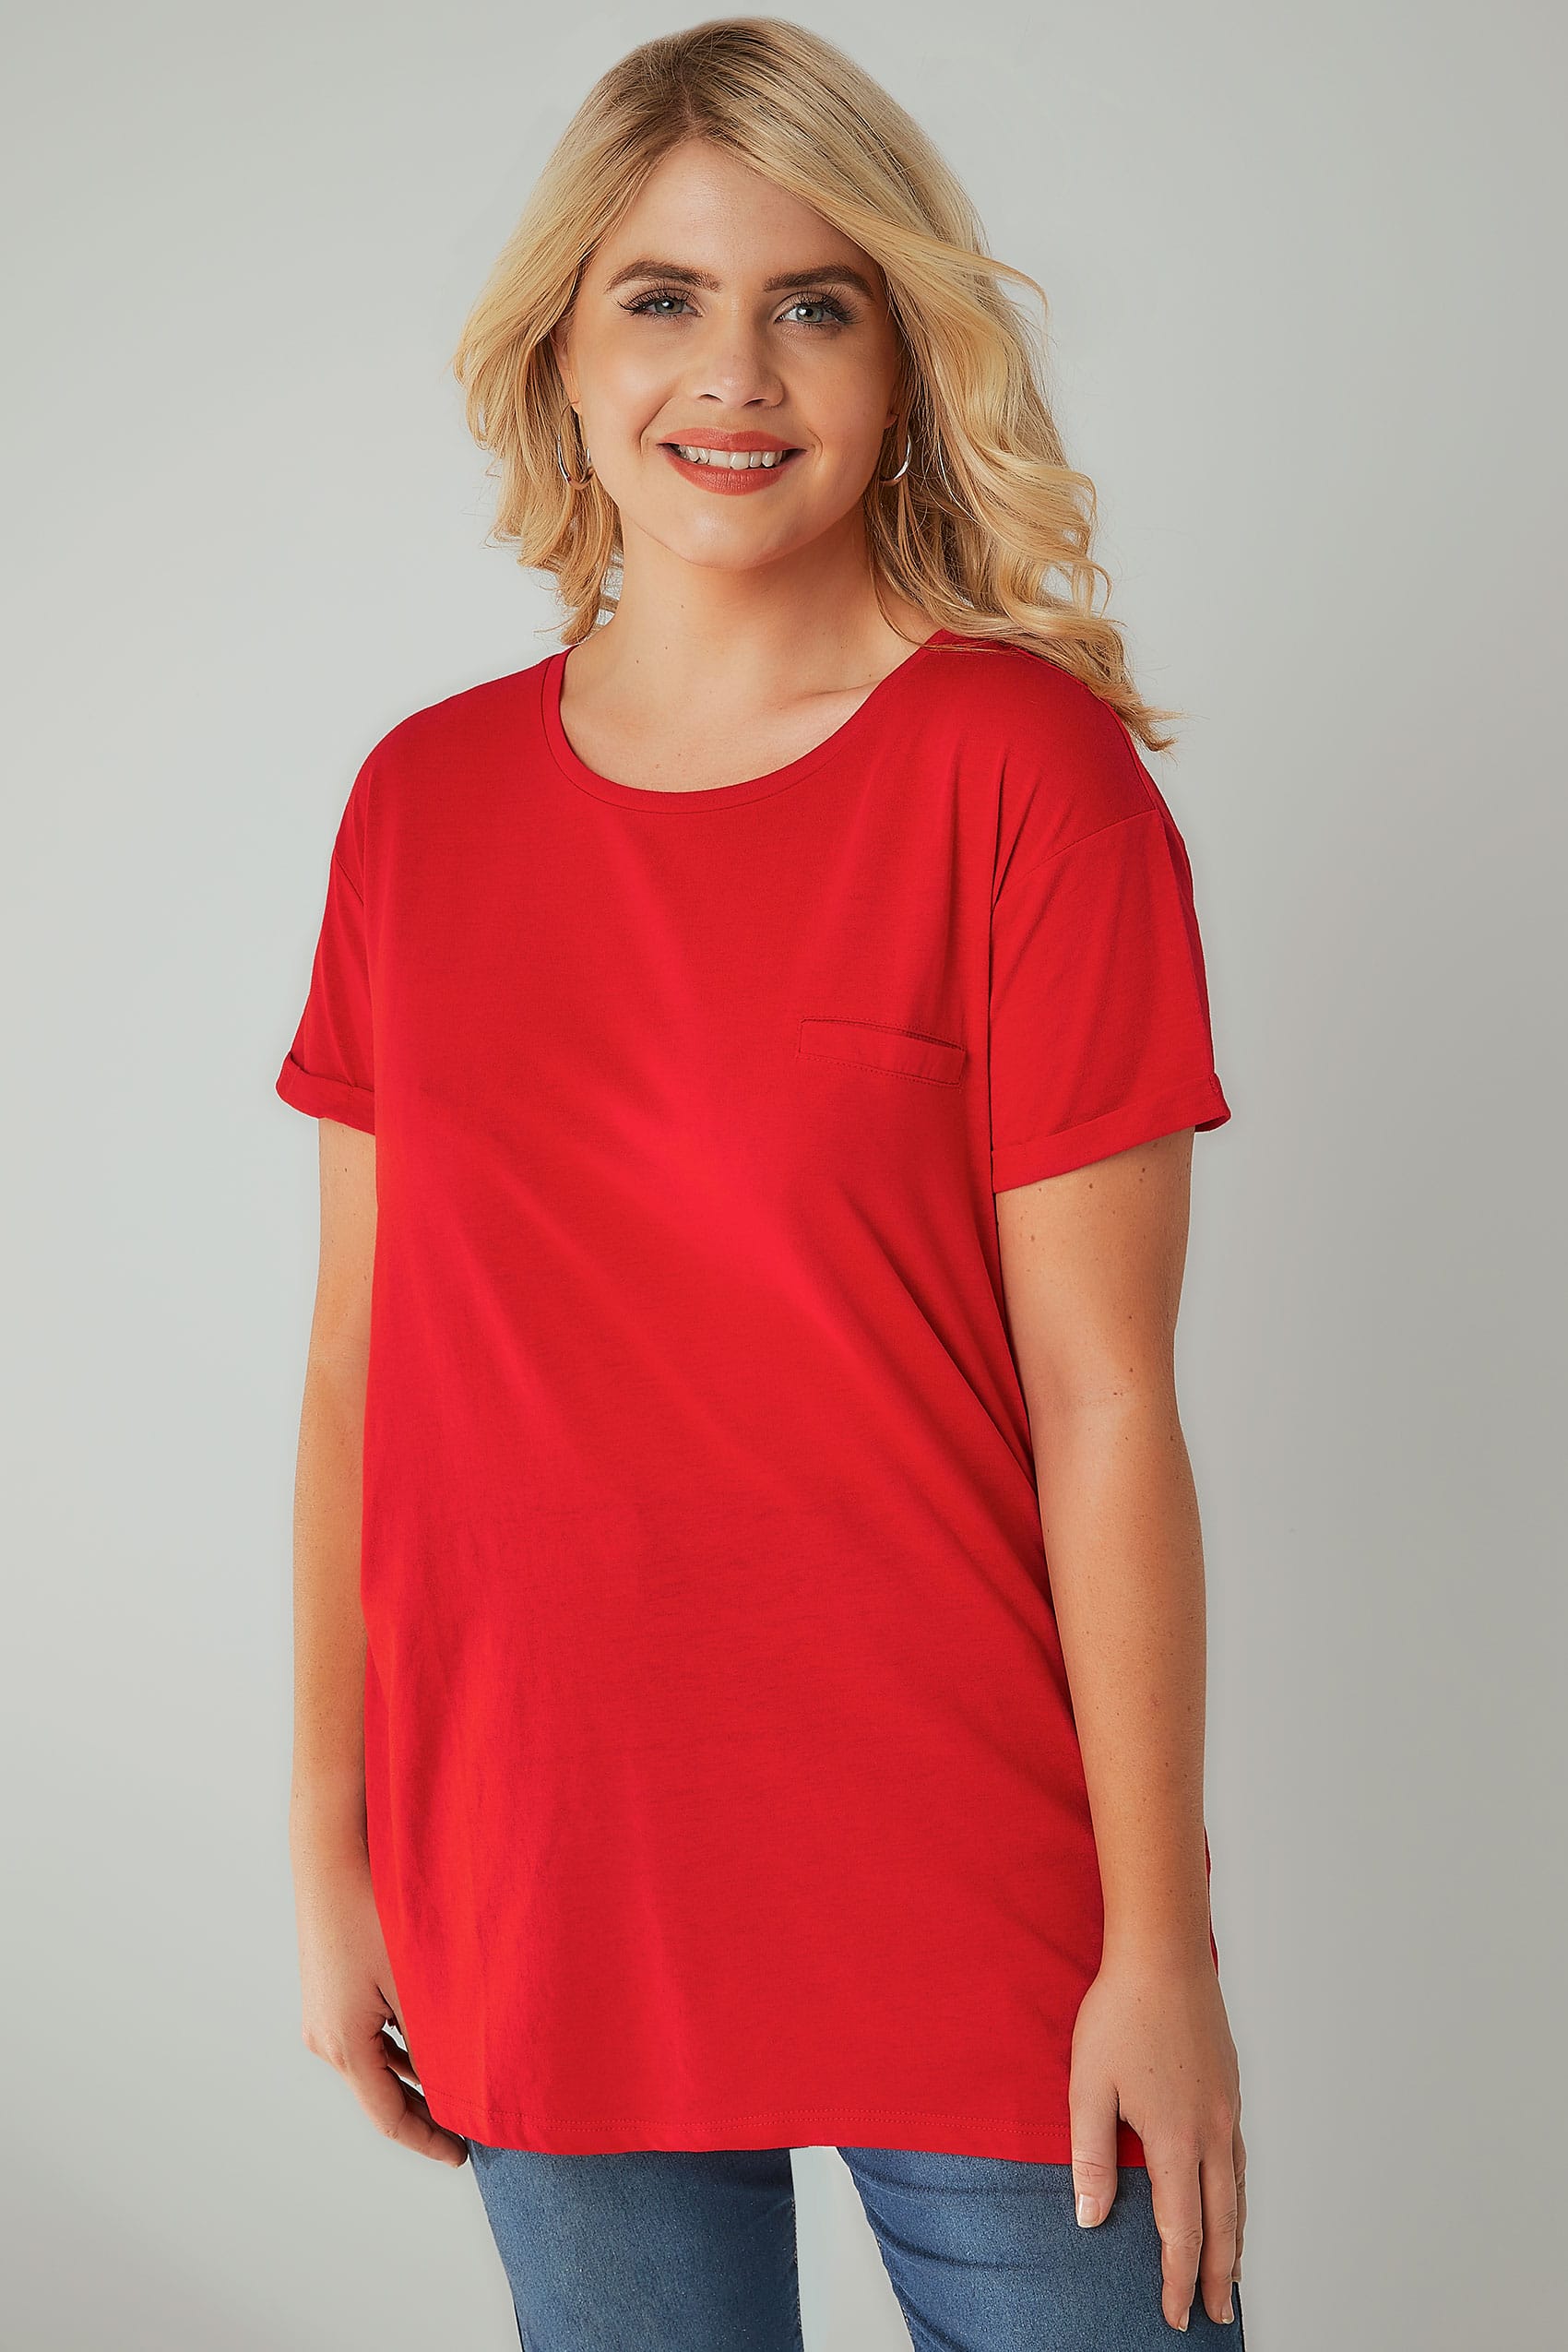 Coral Pocket T-Shirt With Curved Hem, Plus size 16 to 36